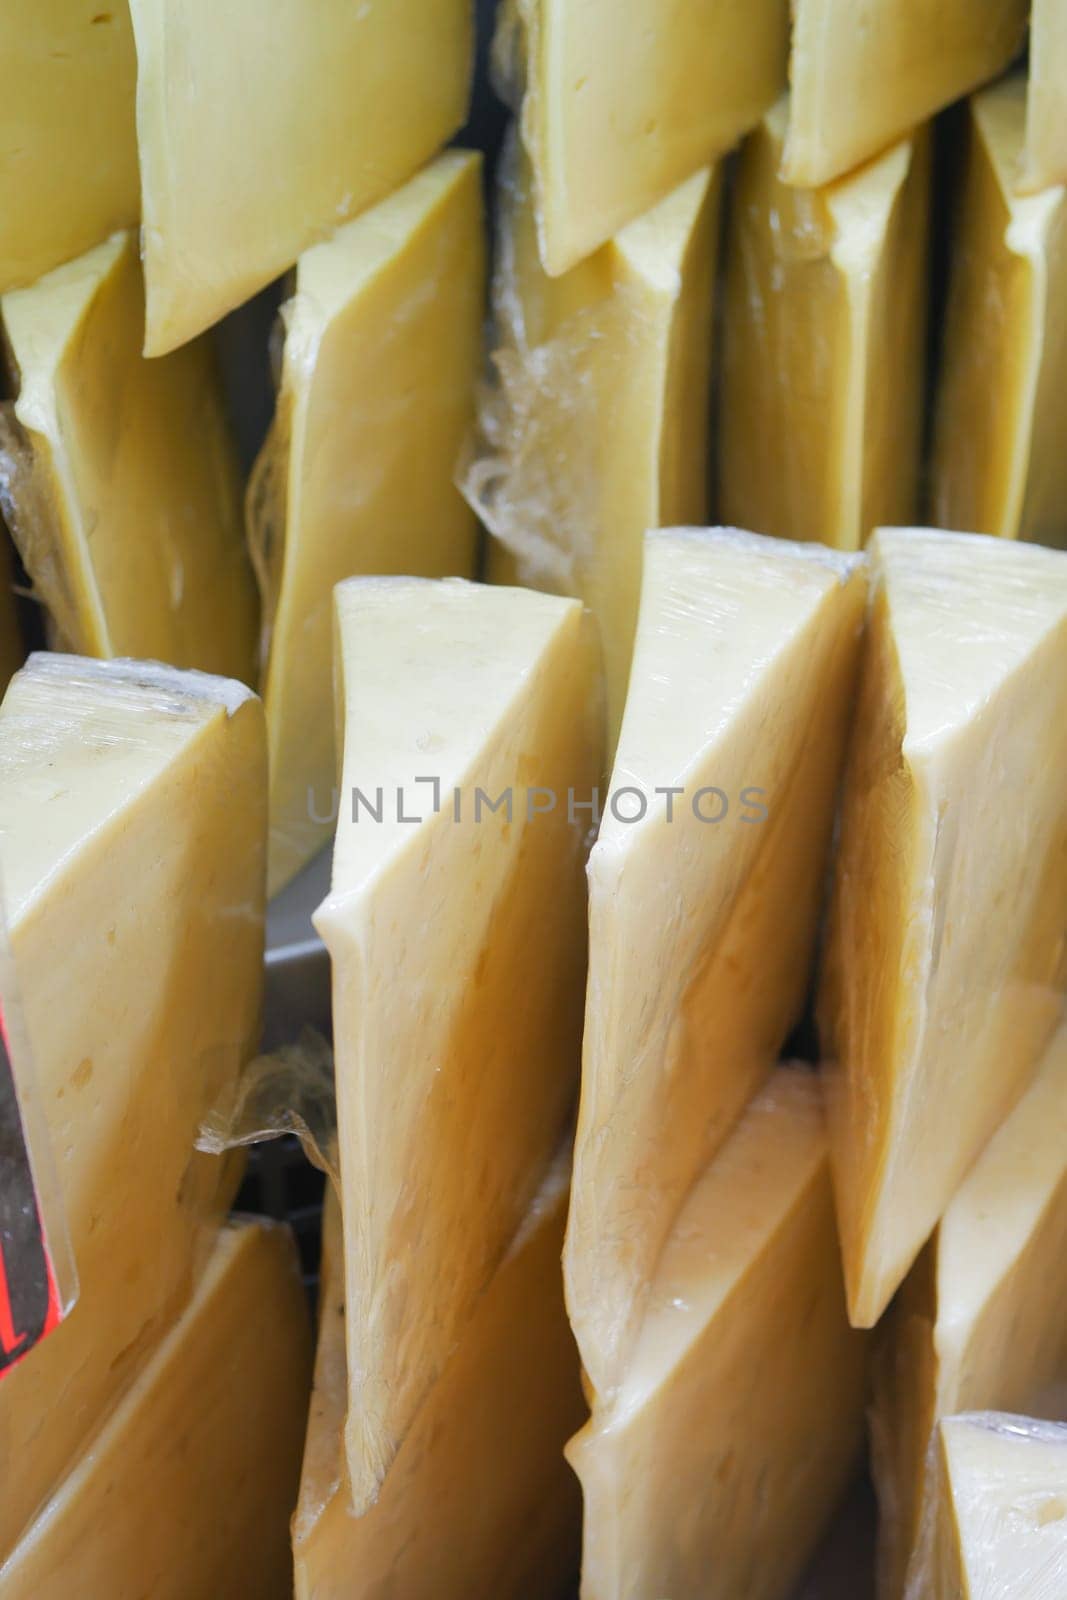 cheese display for sale in eminonu by towfiq007